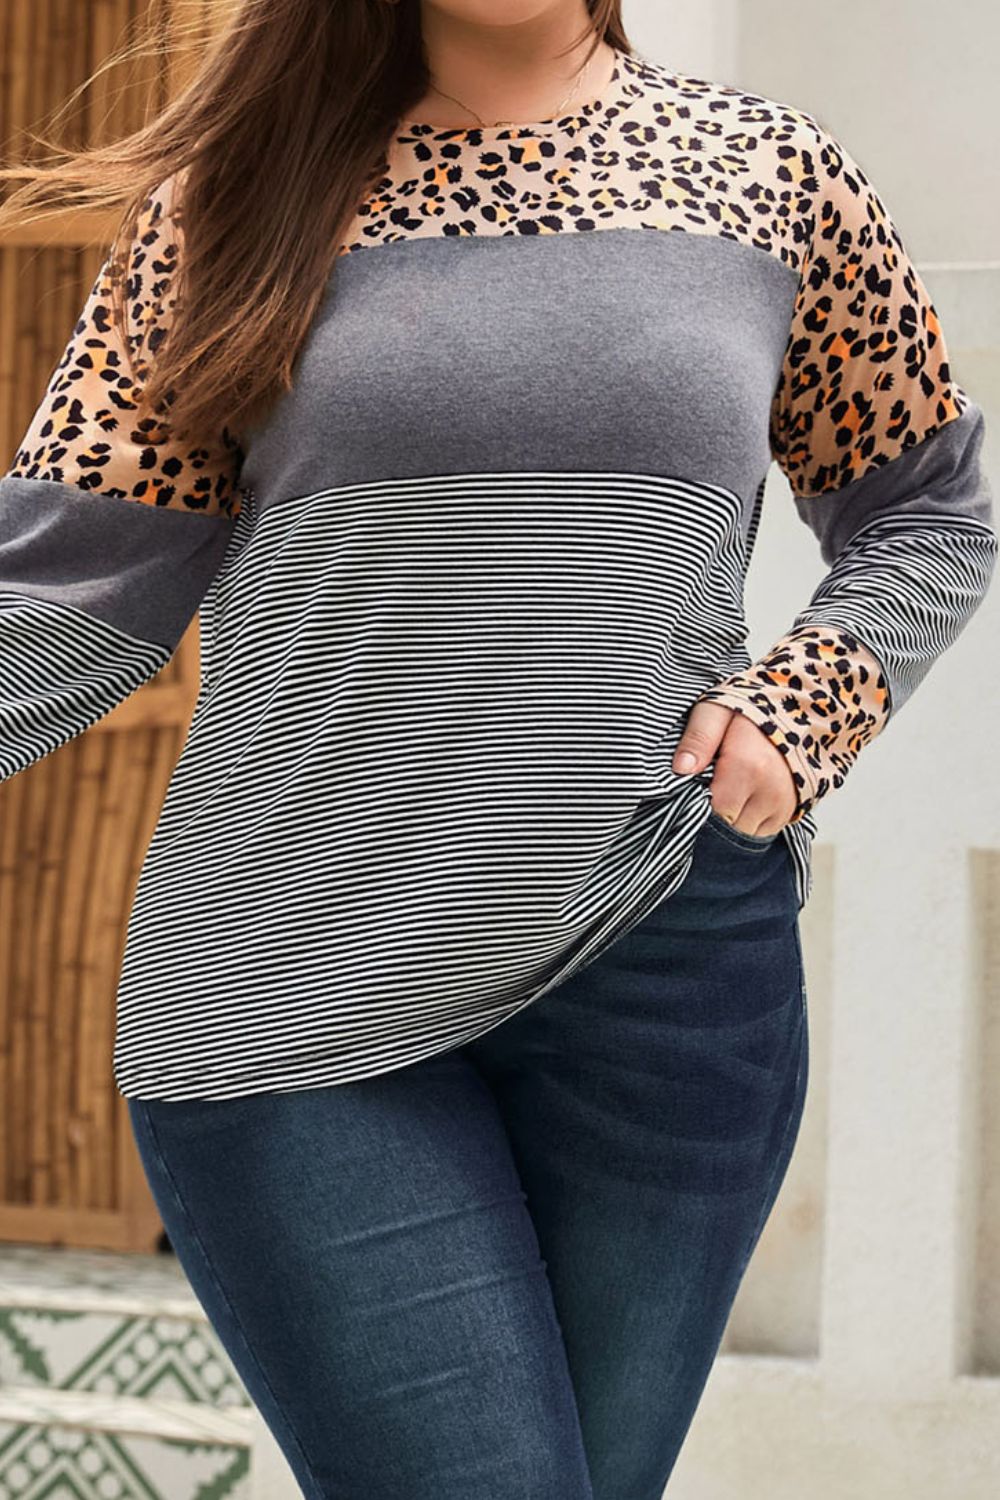 Plus Size Striped Round Neck Long Sleeve T-Shirt